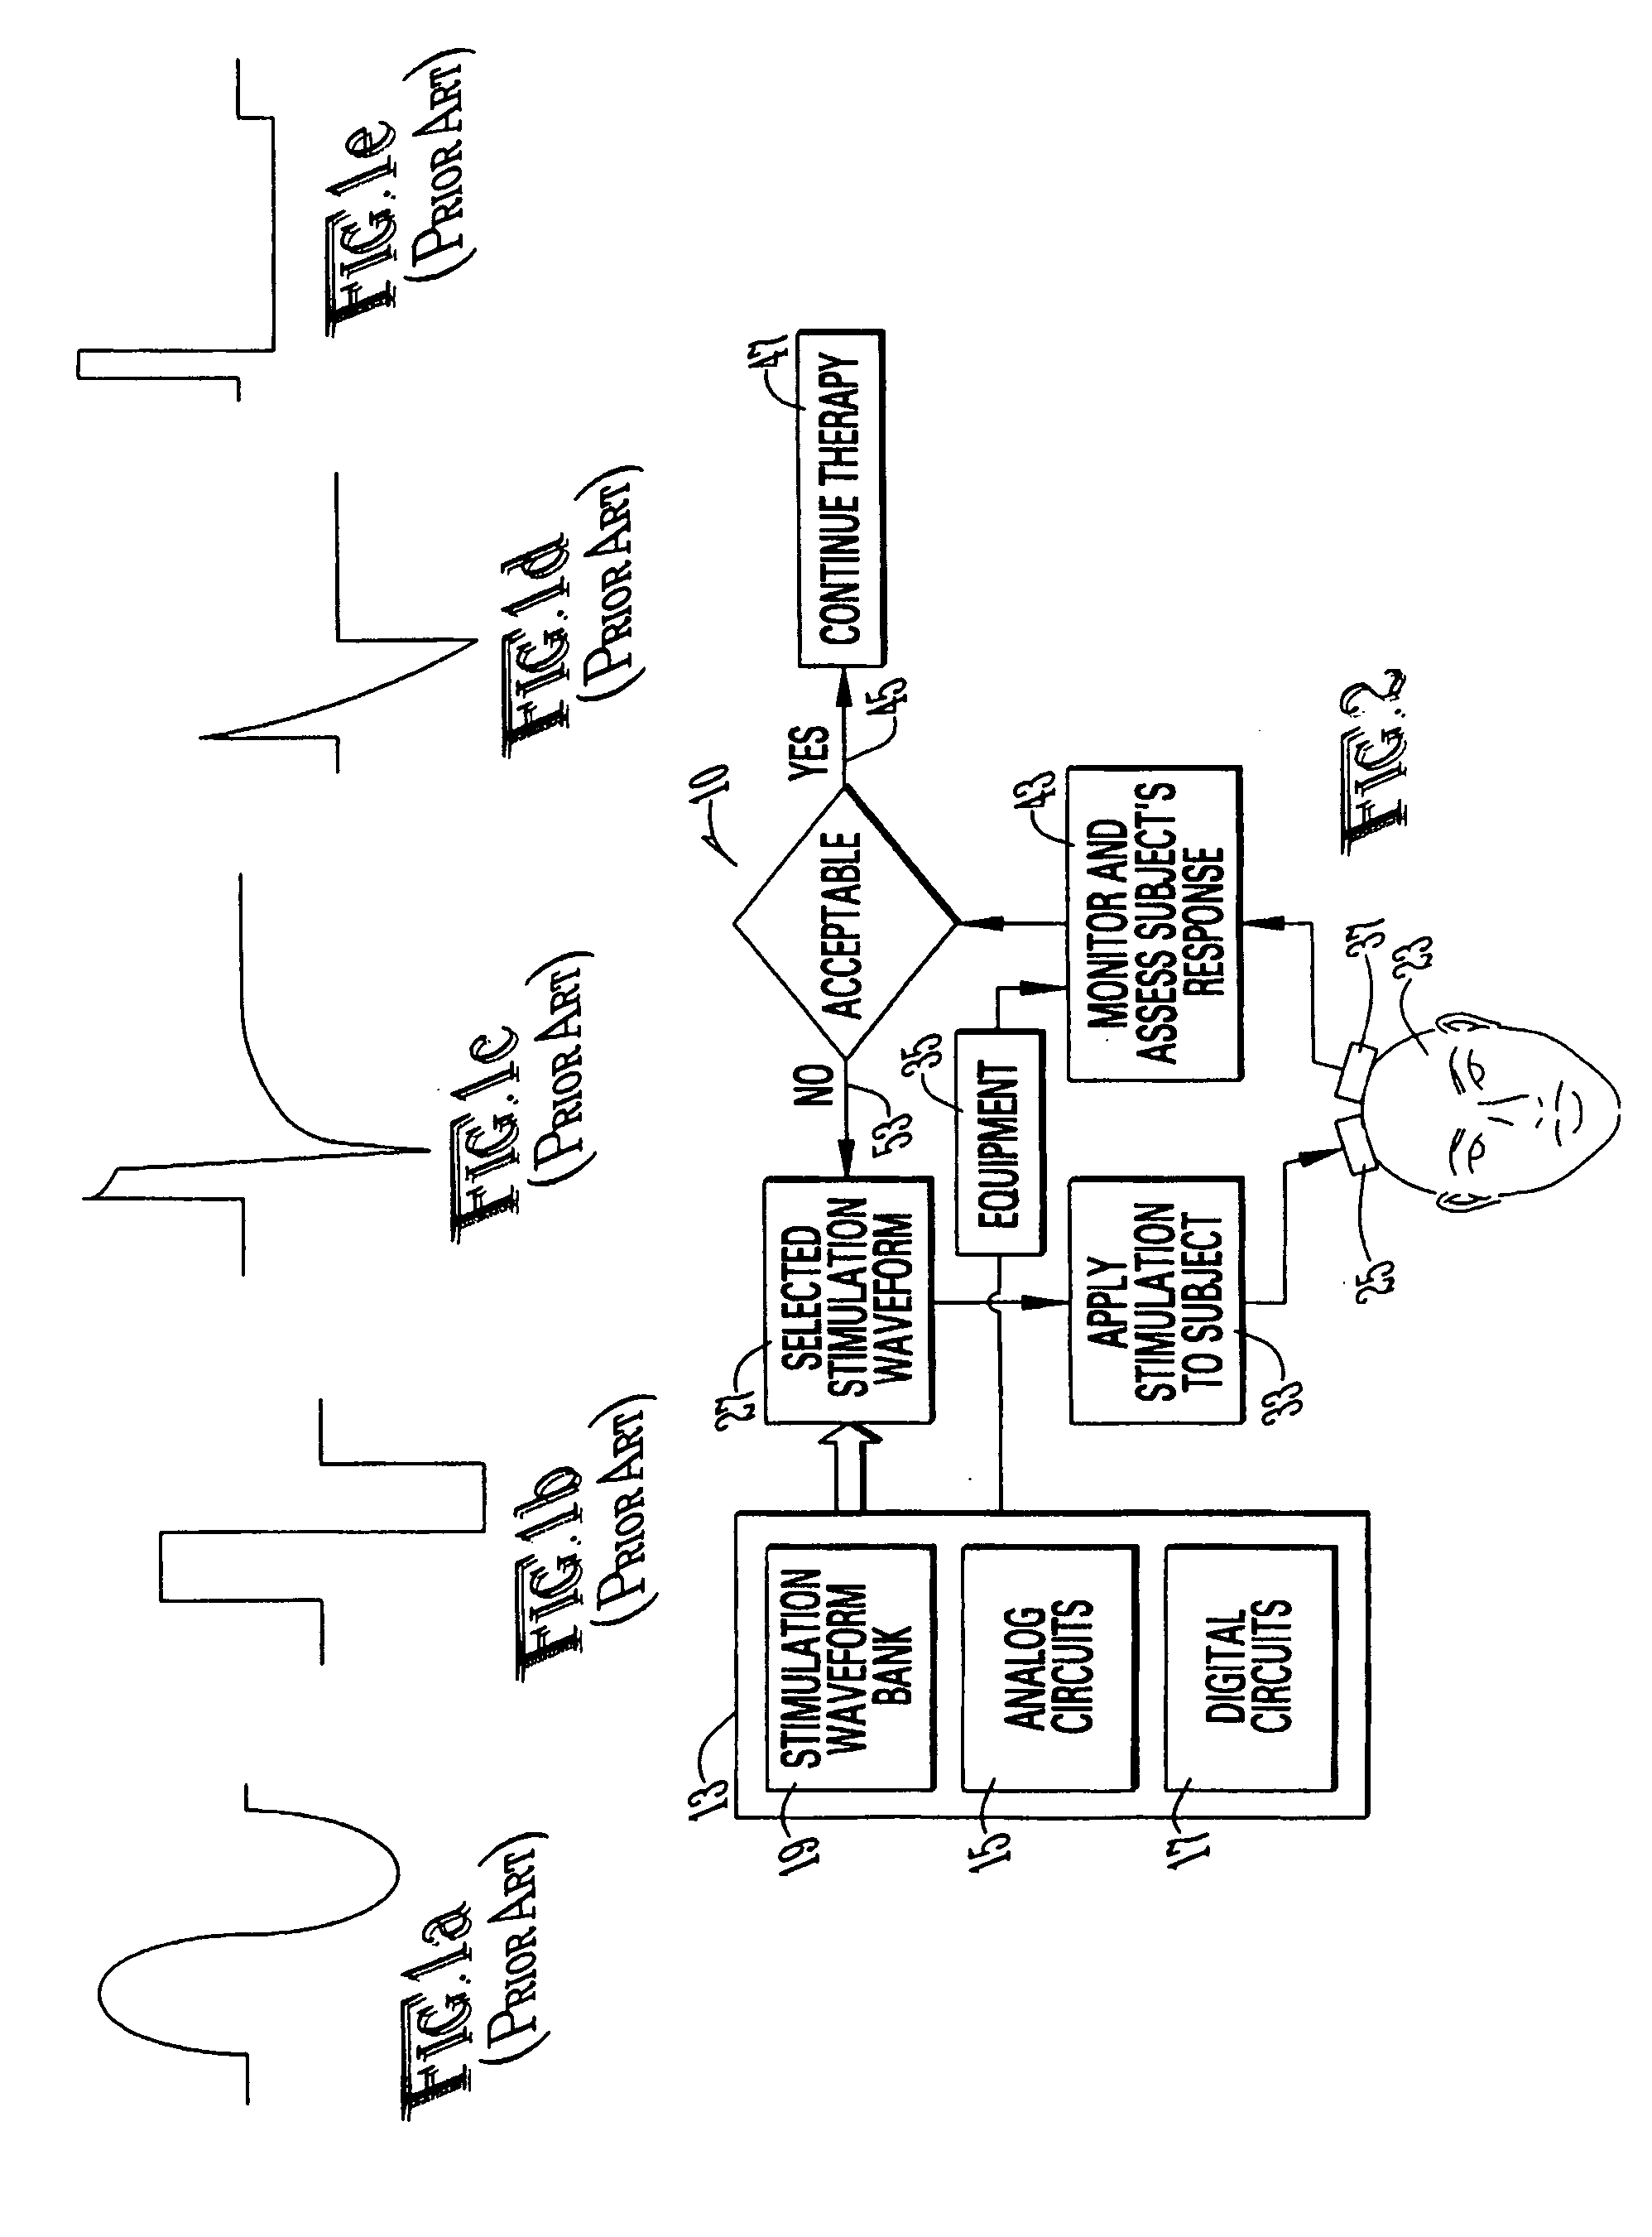 Stimulation methodologies and apparatus for control of brain states